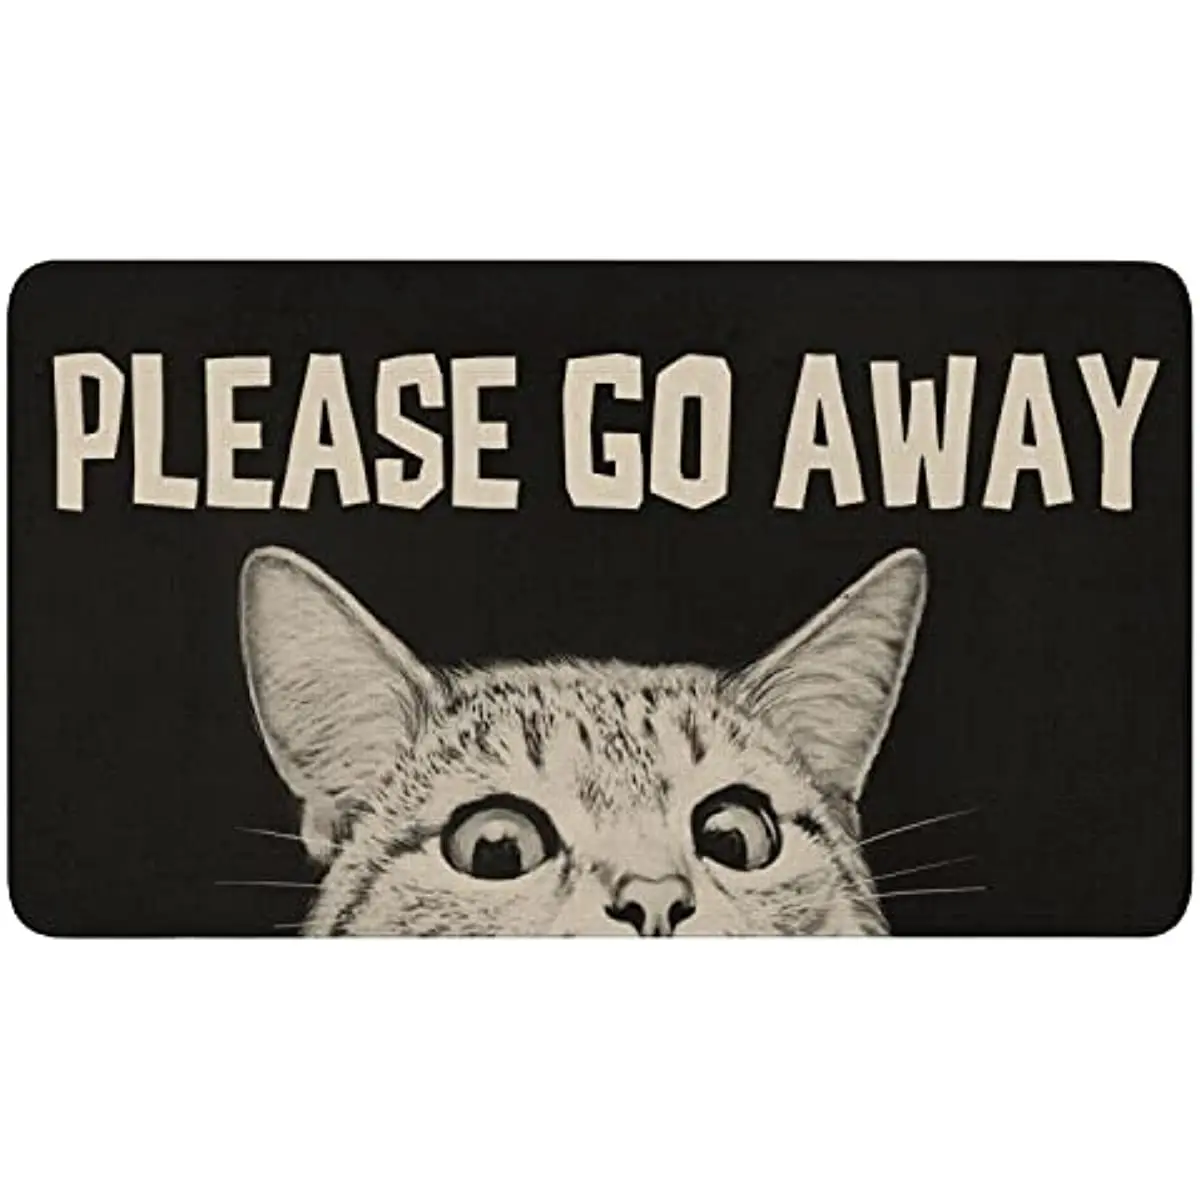 

Funny Black Paws Doormat Outdoor, Cute Pet Low-Profile Durable Funny Welcome Mats Entryway Front Porch Decor